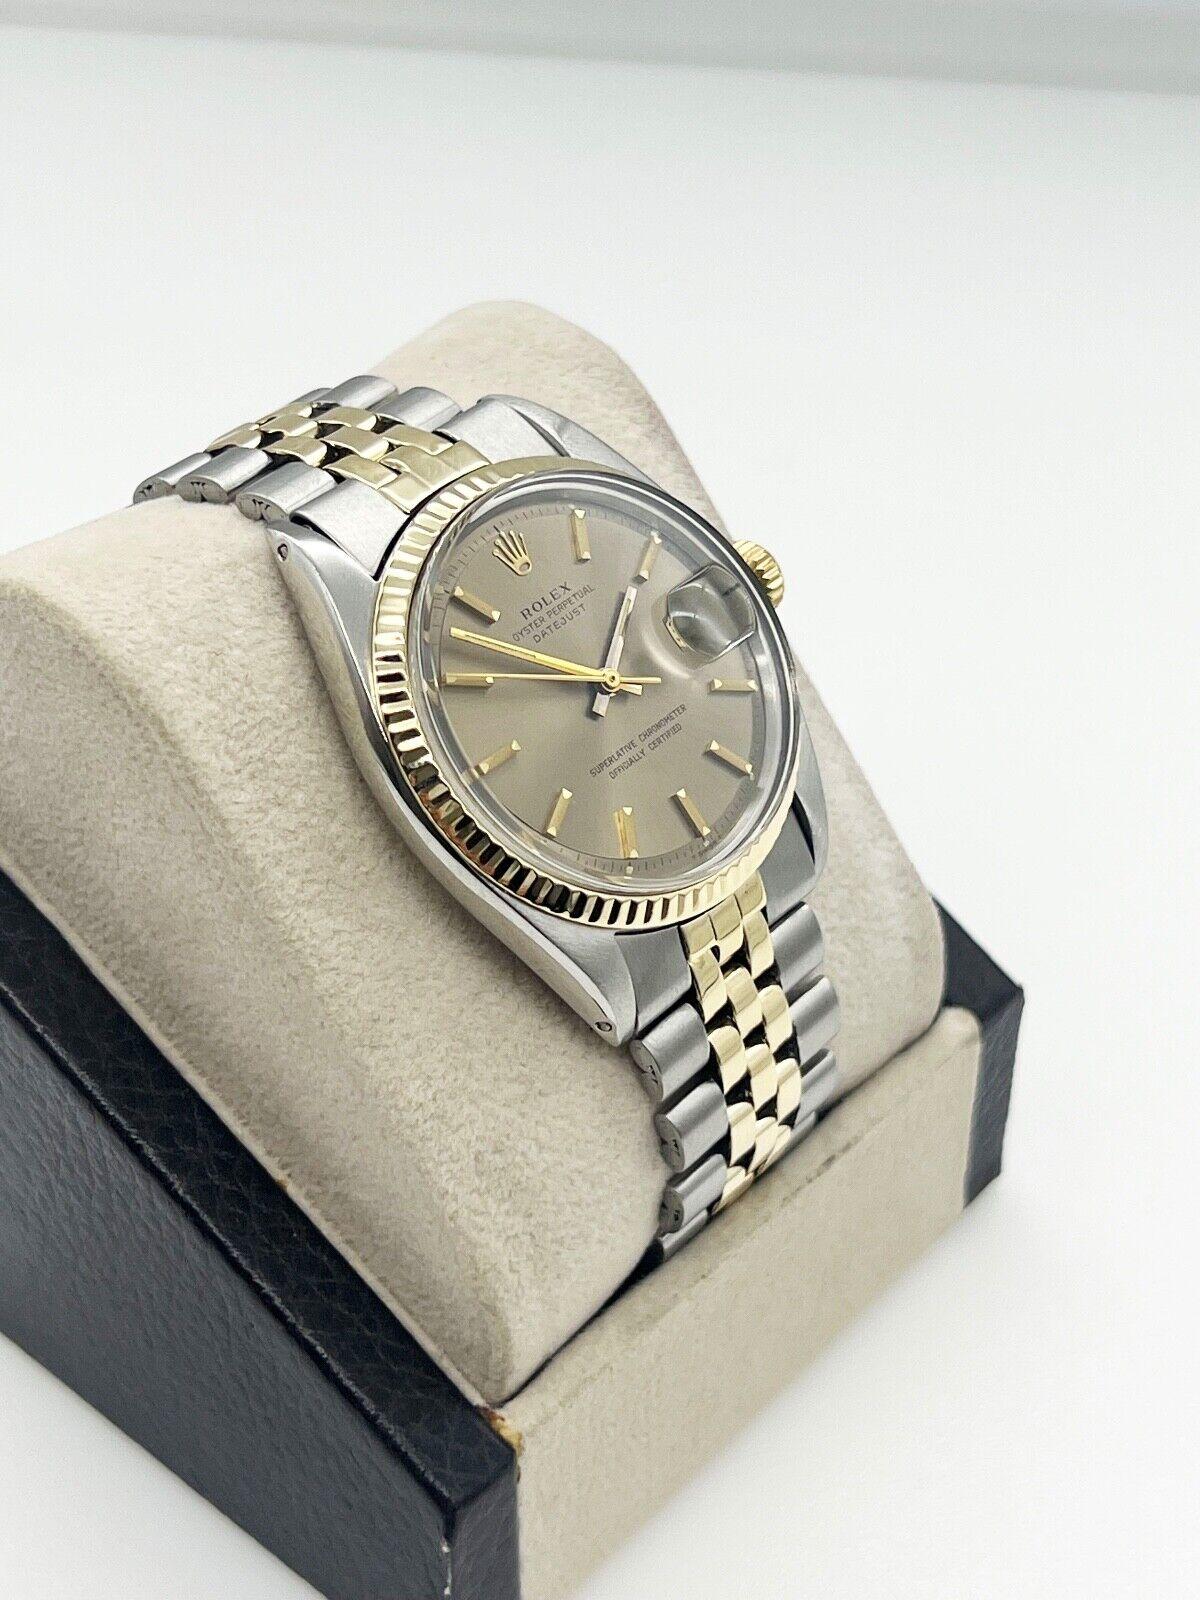 Style Number: 1601

Serial: 2657***

Year: 1970

Model: Datejust

Case Material: Stainless Steel

Band: 14K Yellow Gold & Stainless Steel 

Bezel: 14K Yellow Gold 

Dial: Brown Pie Pan Dial

Face: Acrylic 

Case Size: 36mm

Includes: 

-Elegant